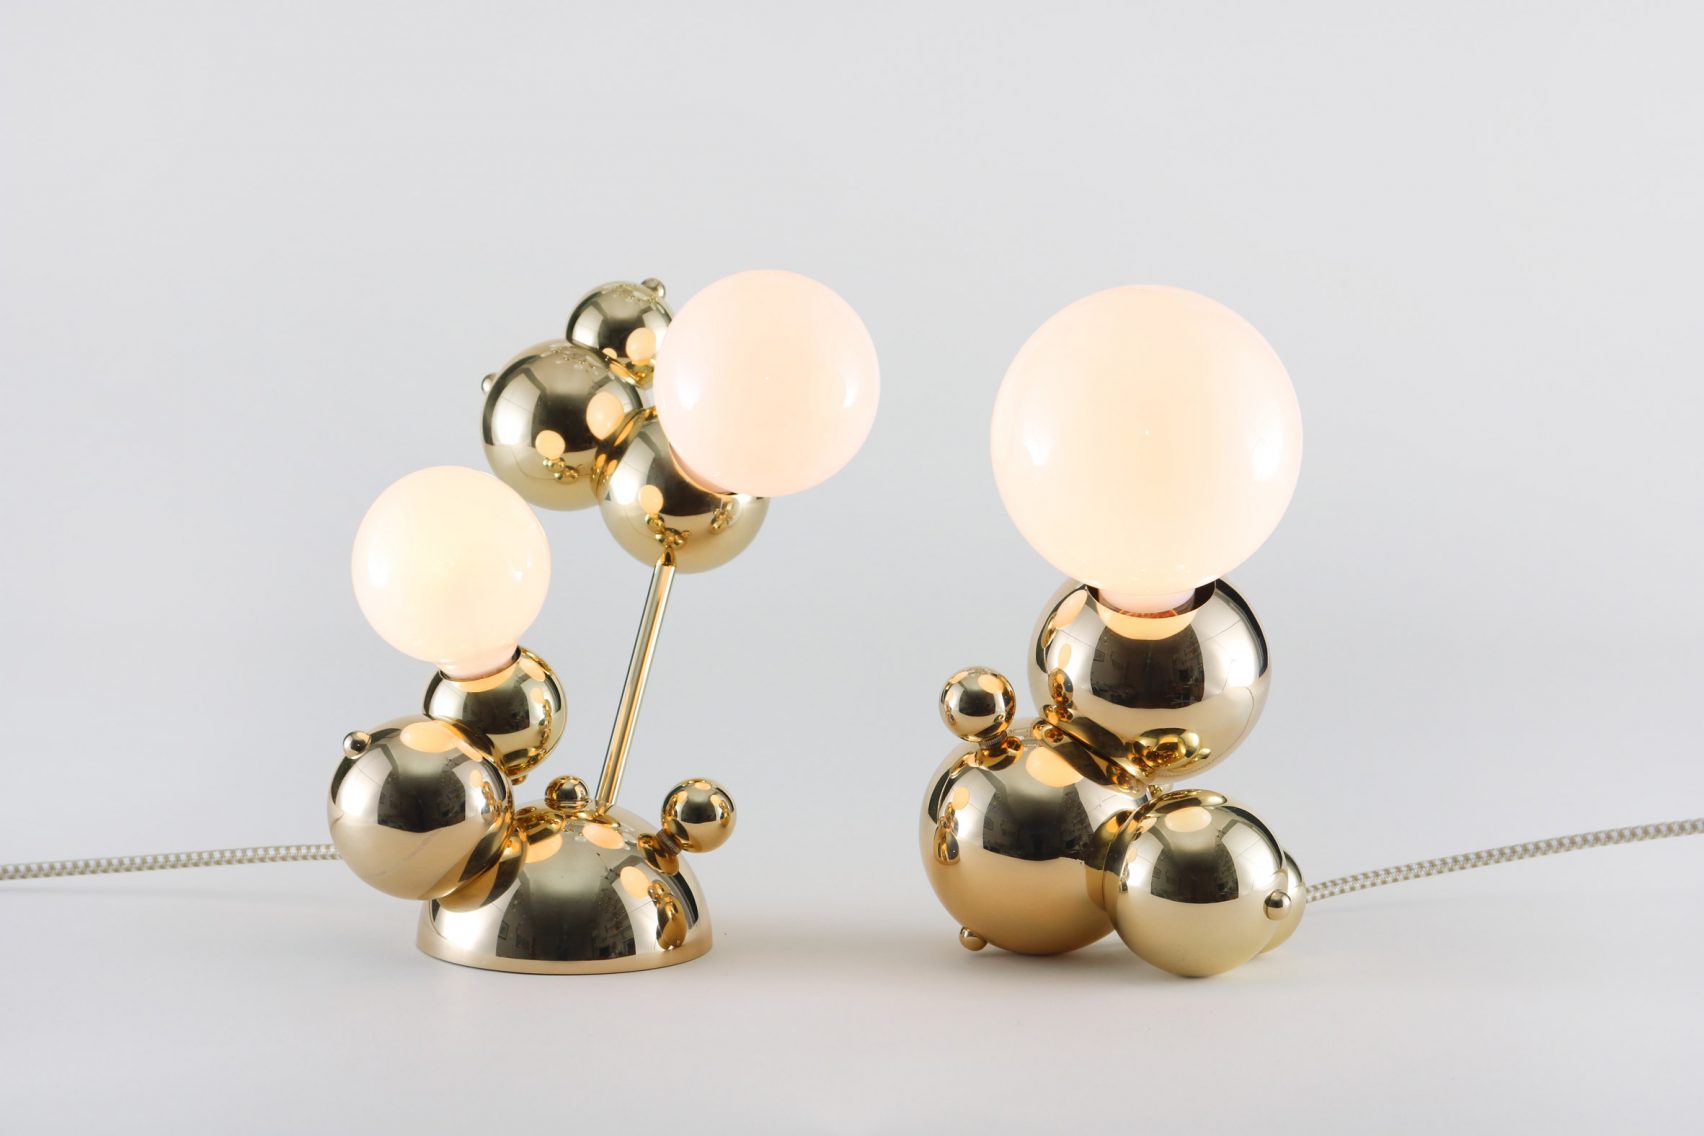 News Flash Bubble Shaped Lighting Collection By Rosie Li 5